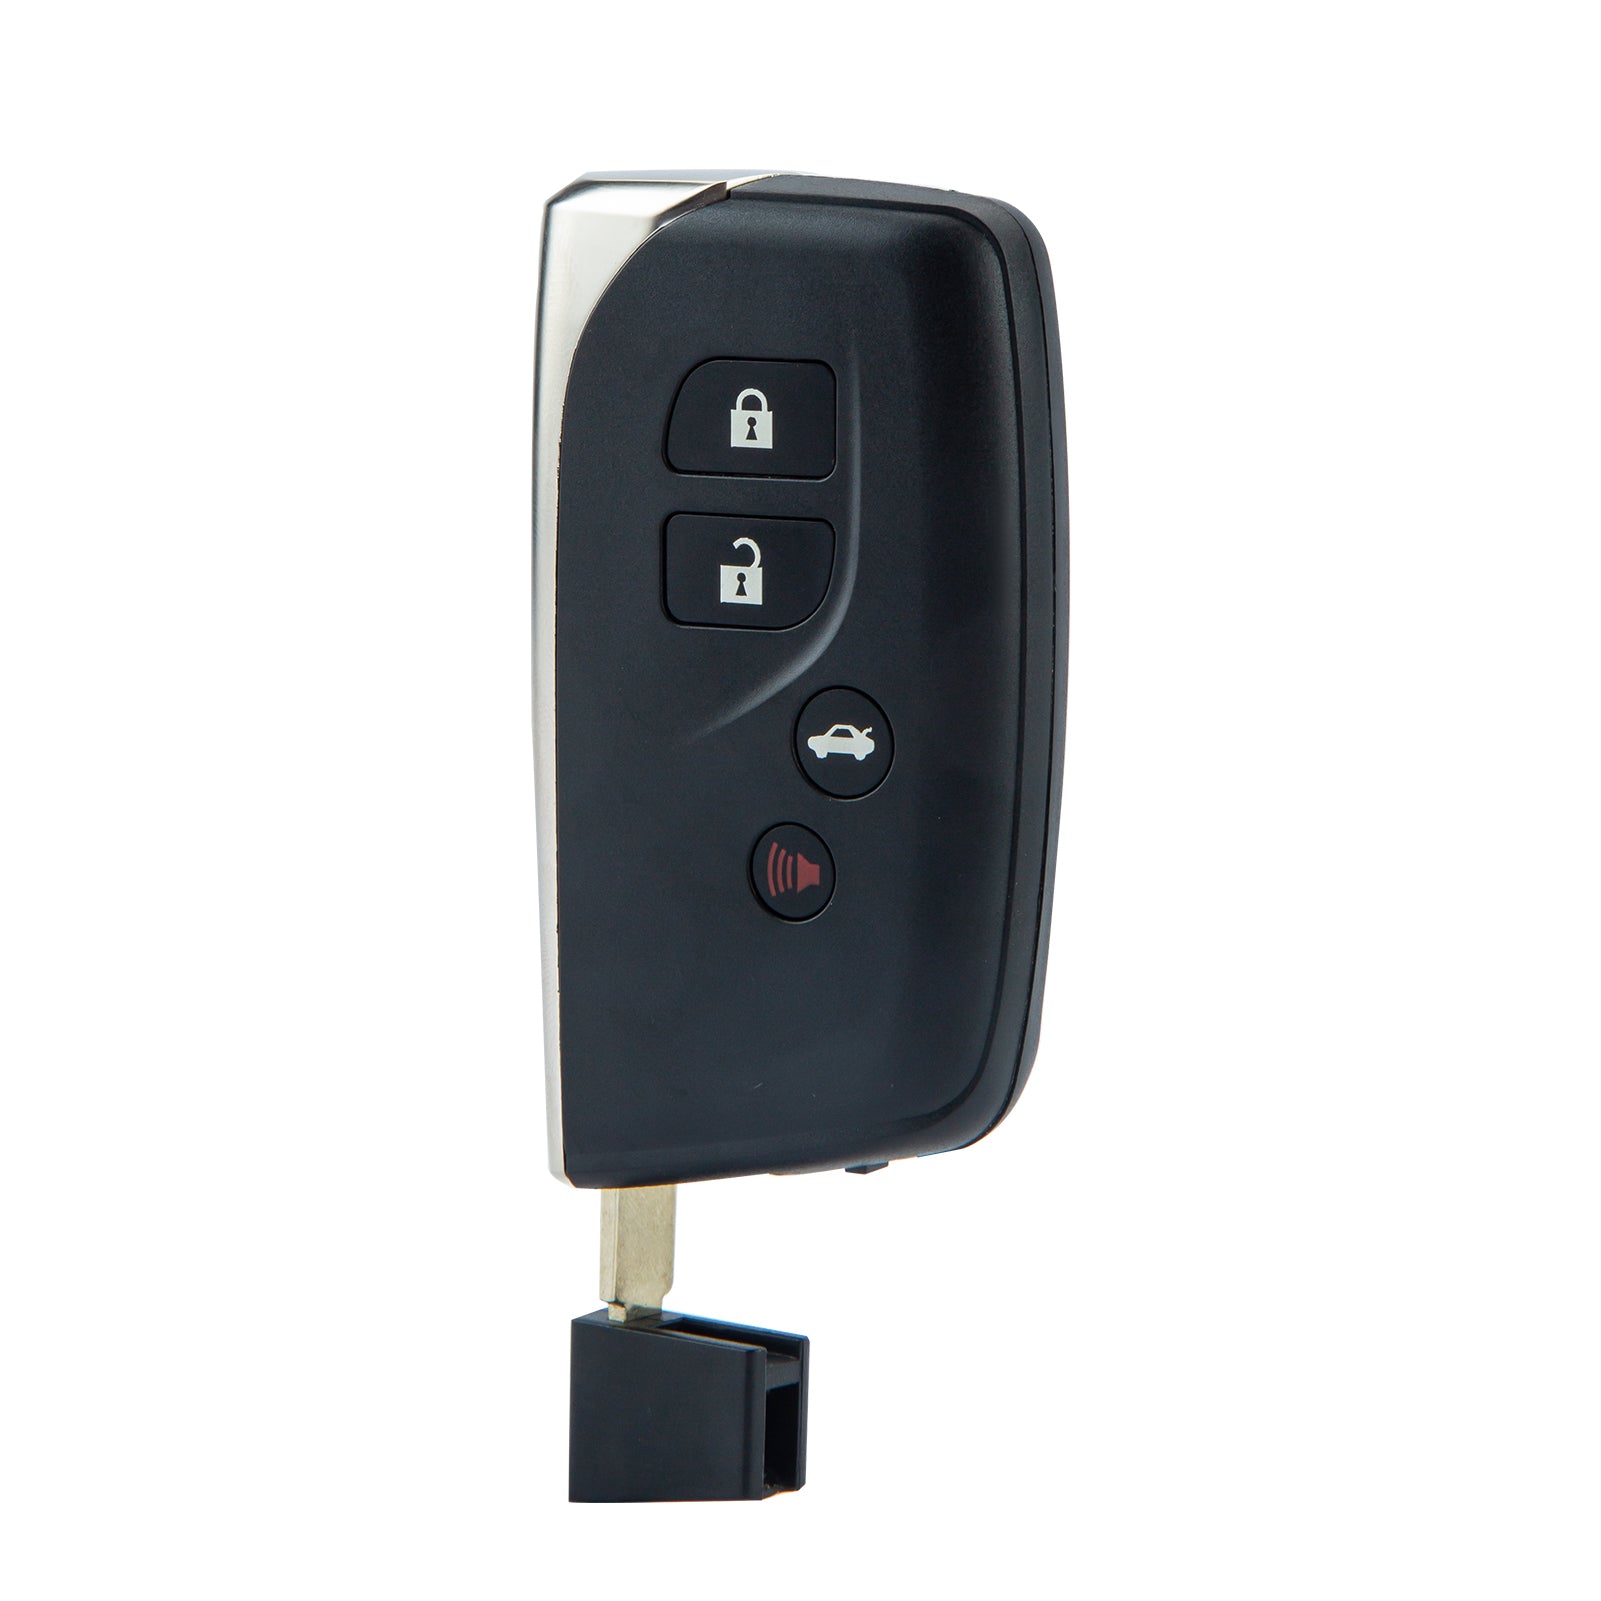 4 BTN Smart Key fob replacememnt for 2013 - 2017 Lexus LS460 LS600H with FCC ID: HYQ14ACX 5290 Board